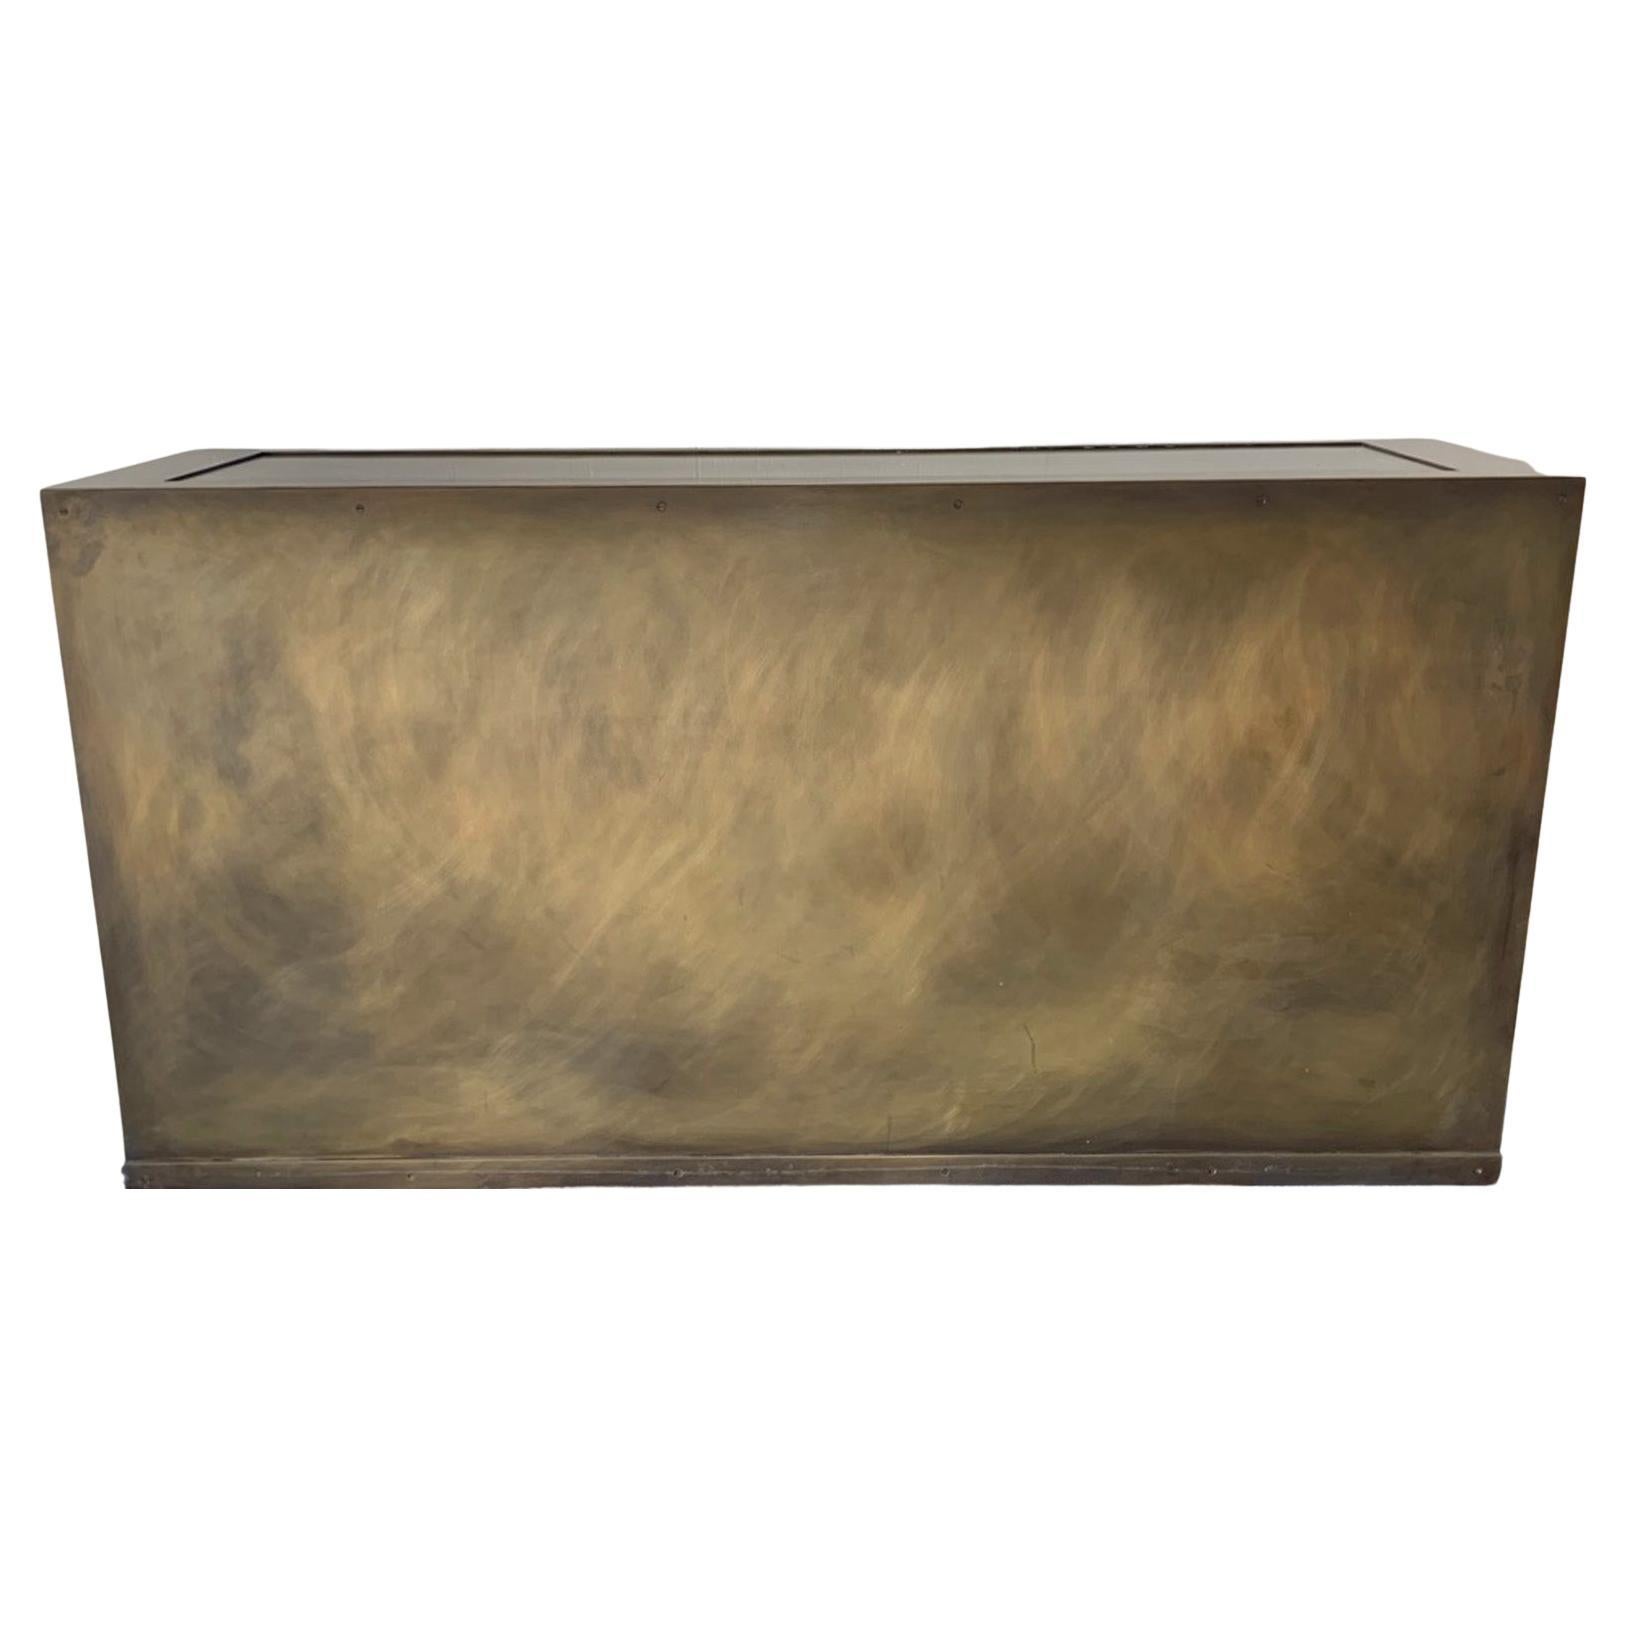 Contemporary Unlacquered Bronze Console with TV Lift Mechanism